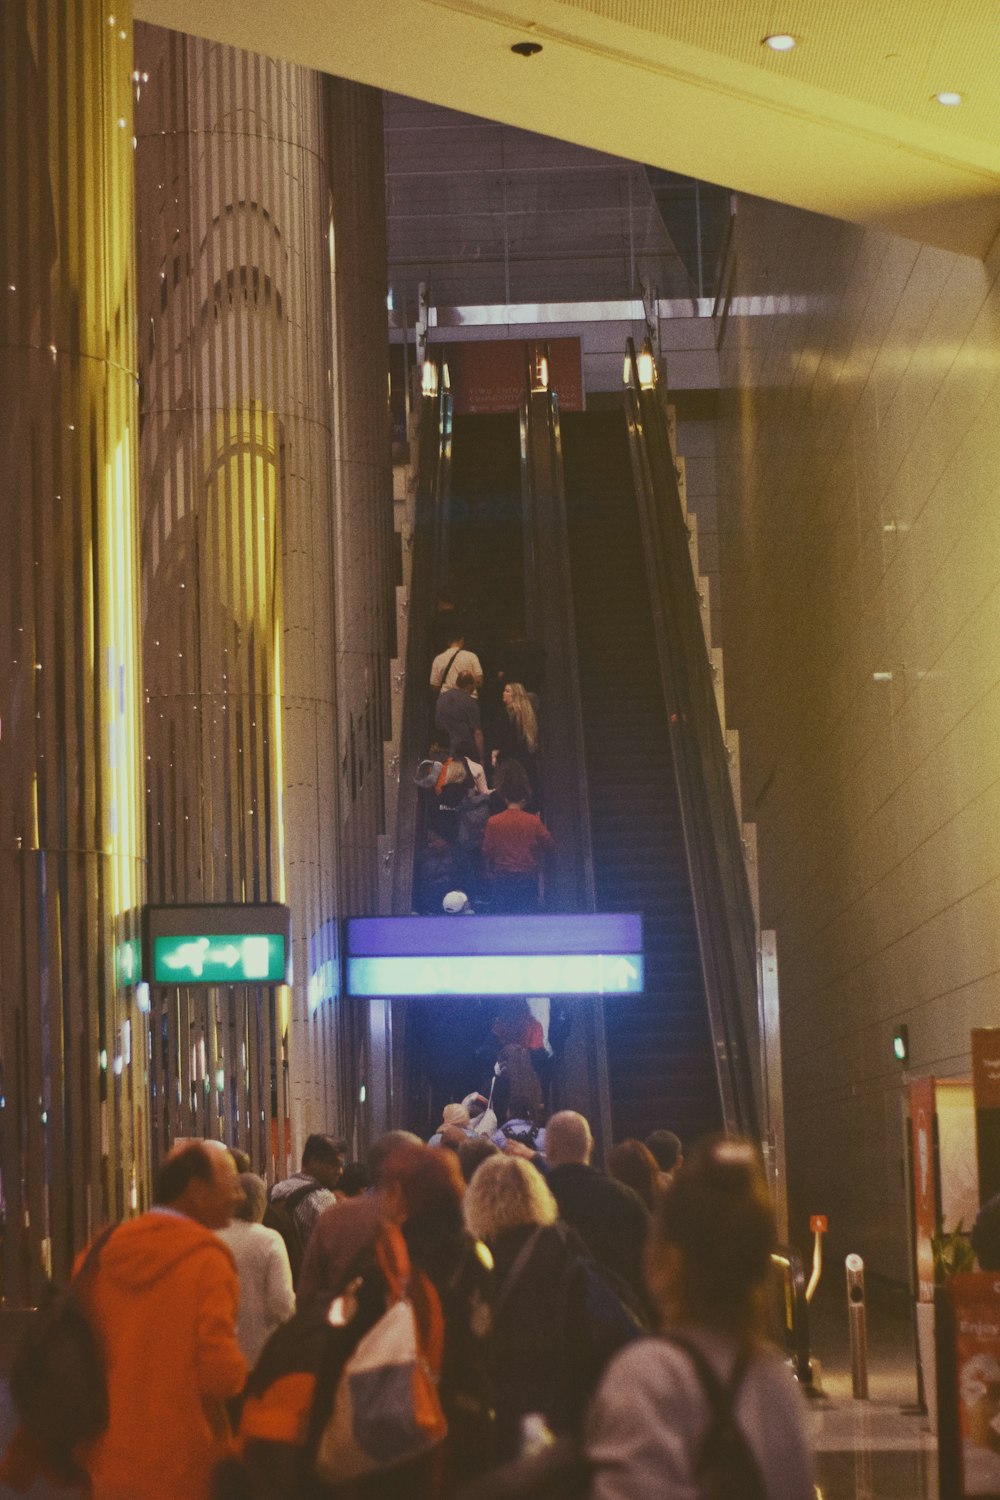 a group of people are walking up an escalator